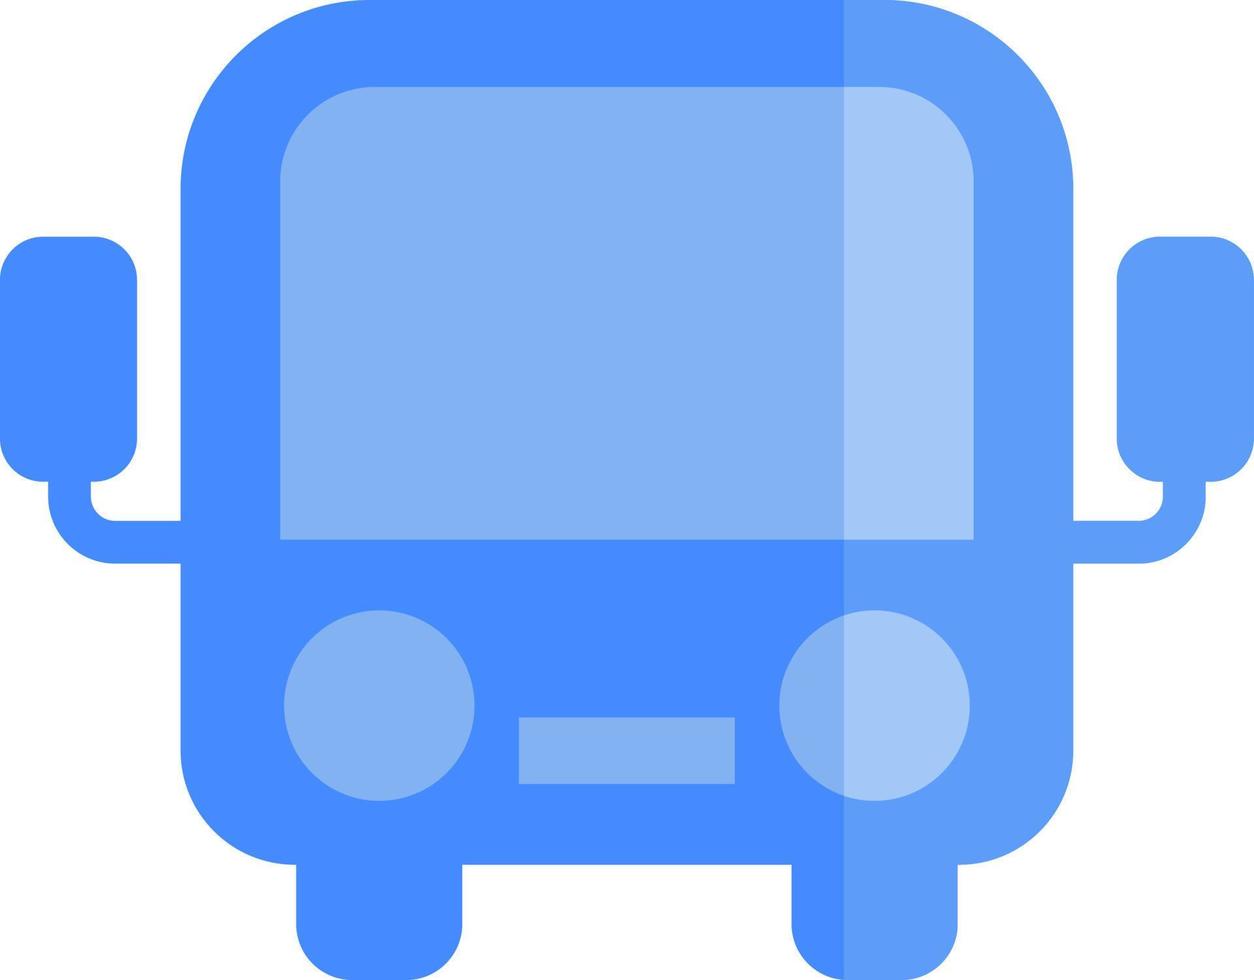 City bus, illustration, vector, on a white background. vector